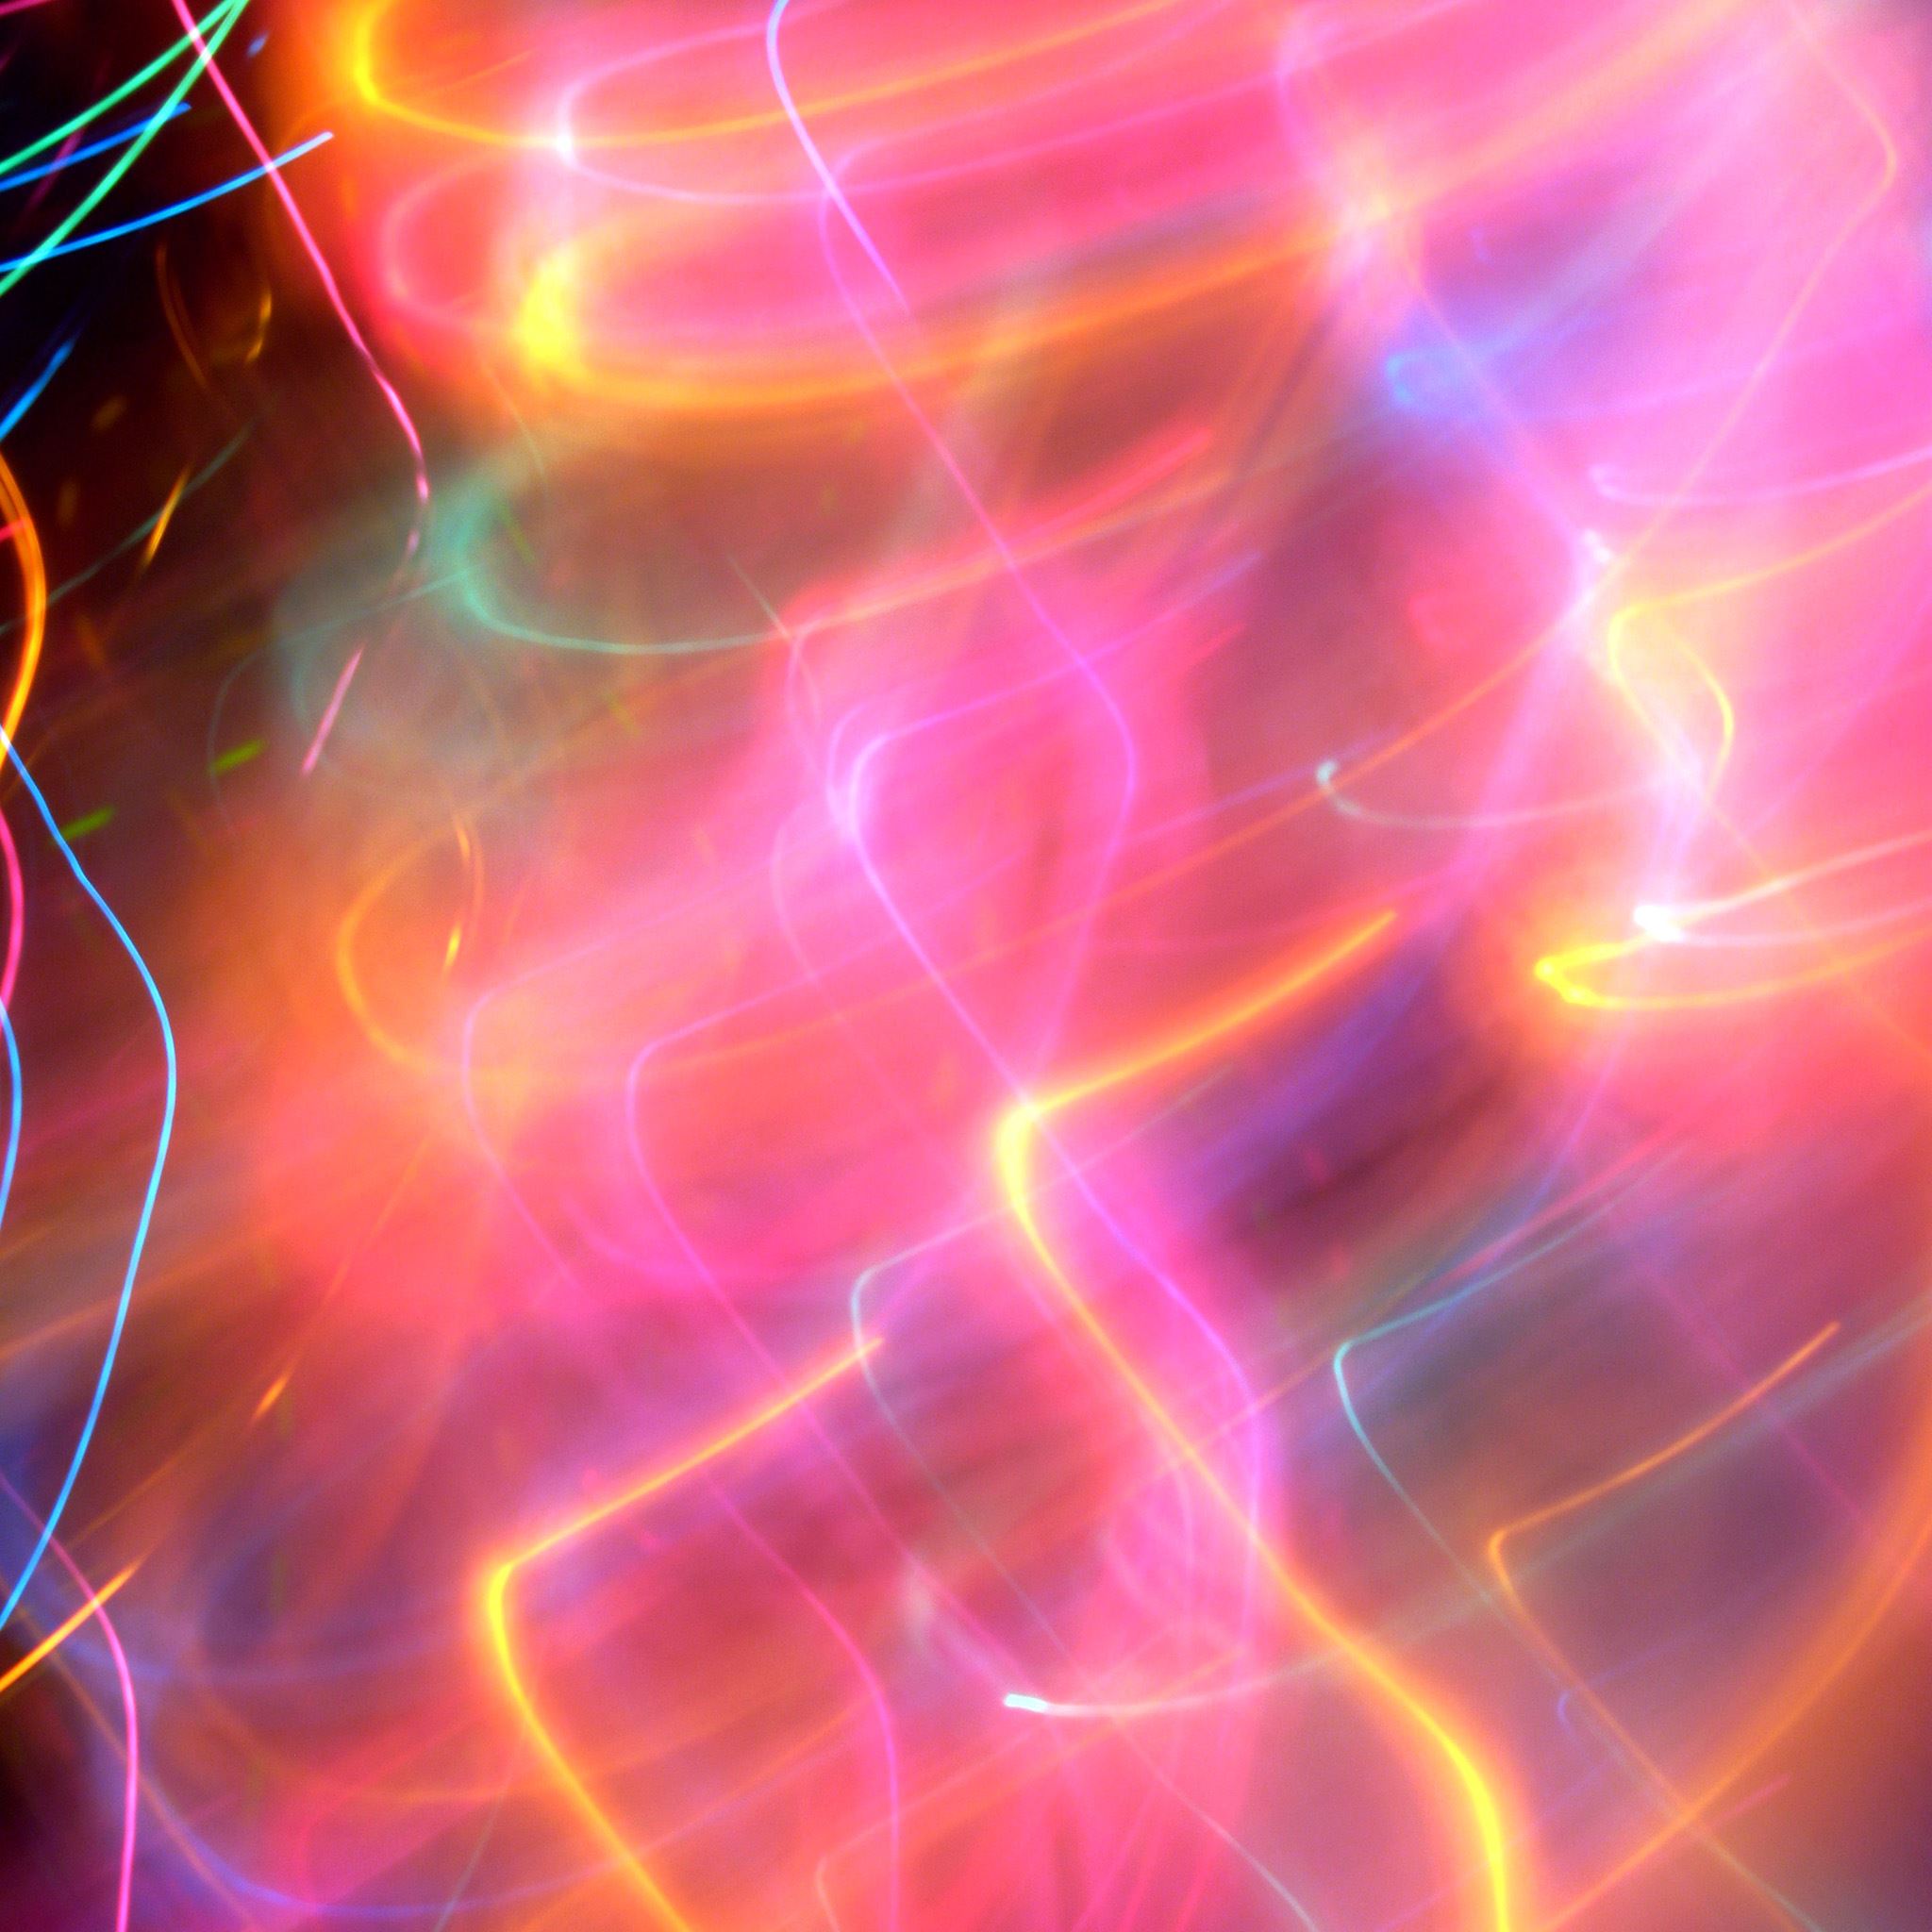 A colorful abstract image of light - Neon orange